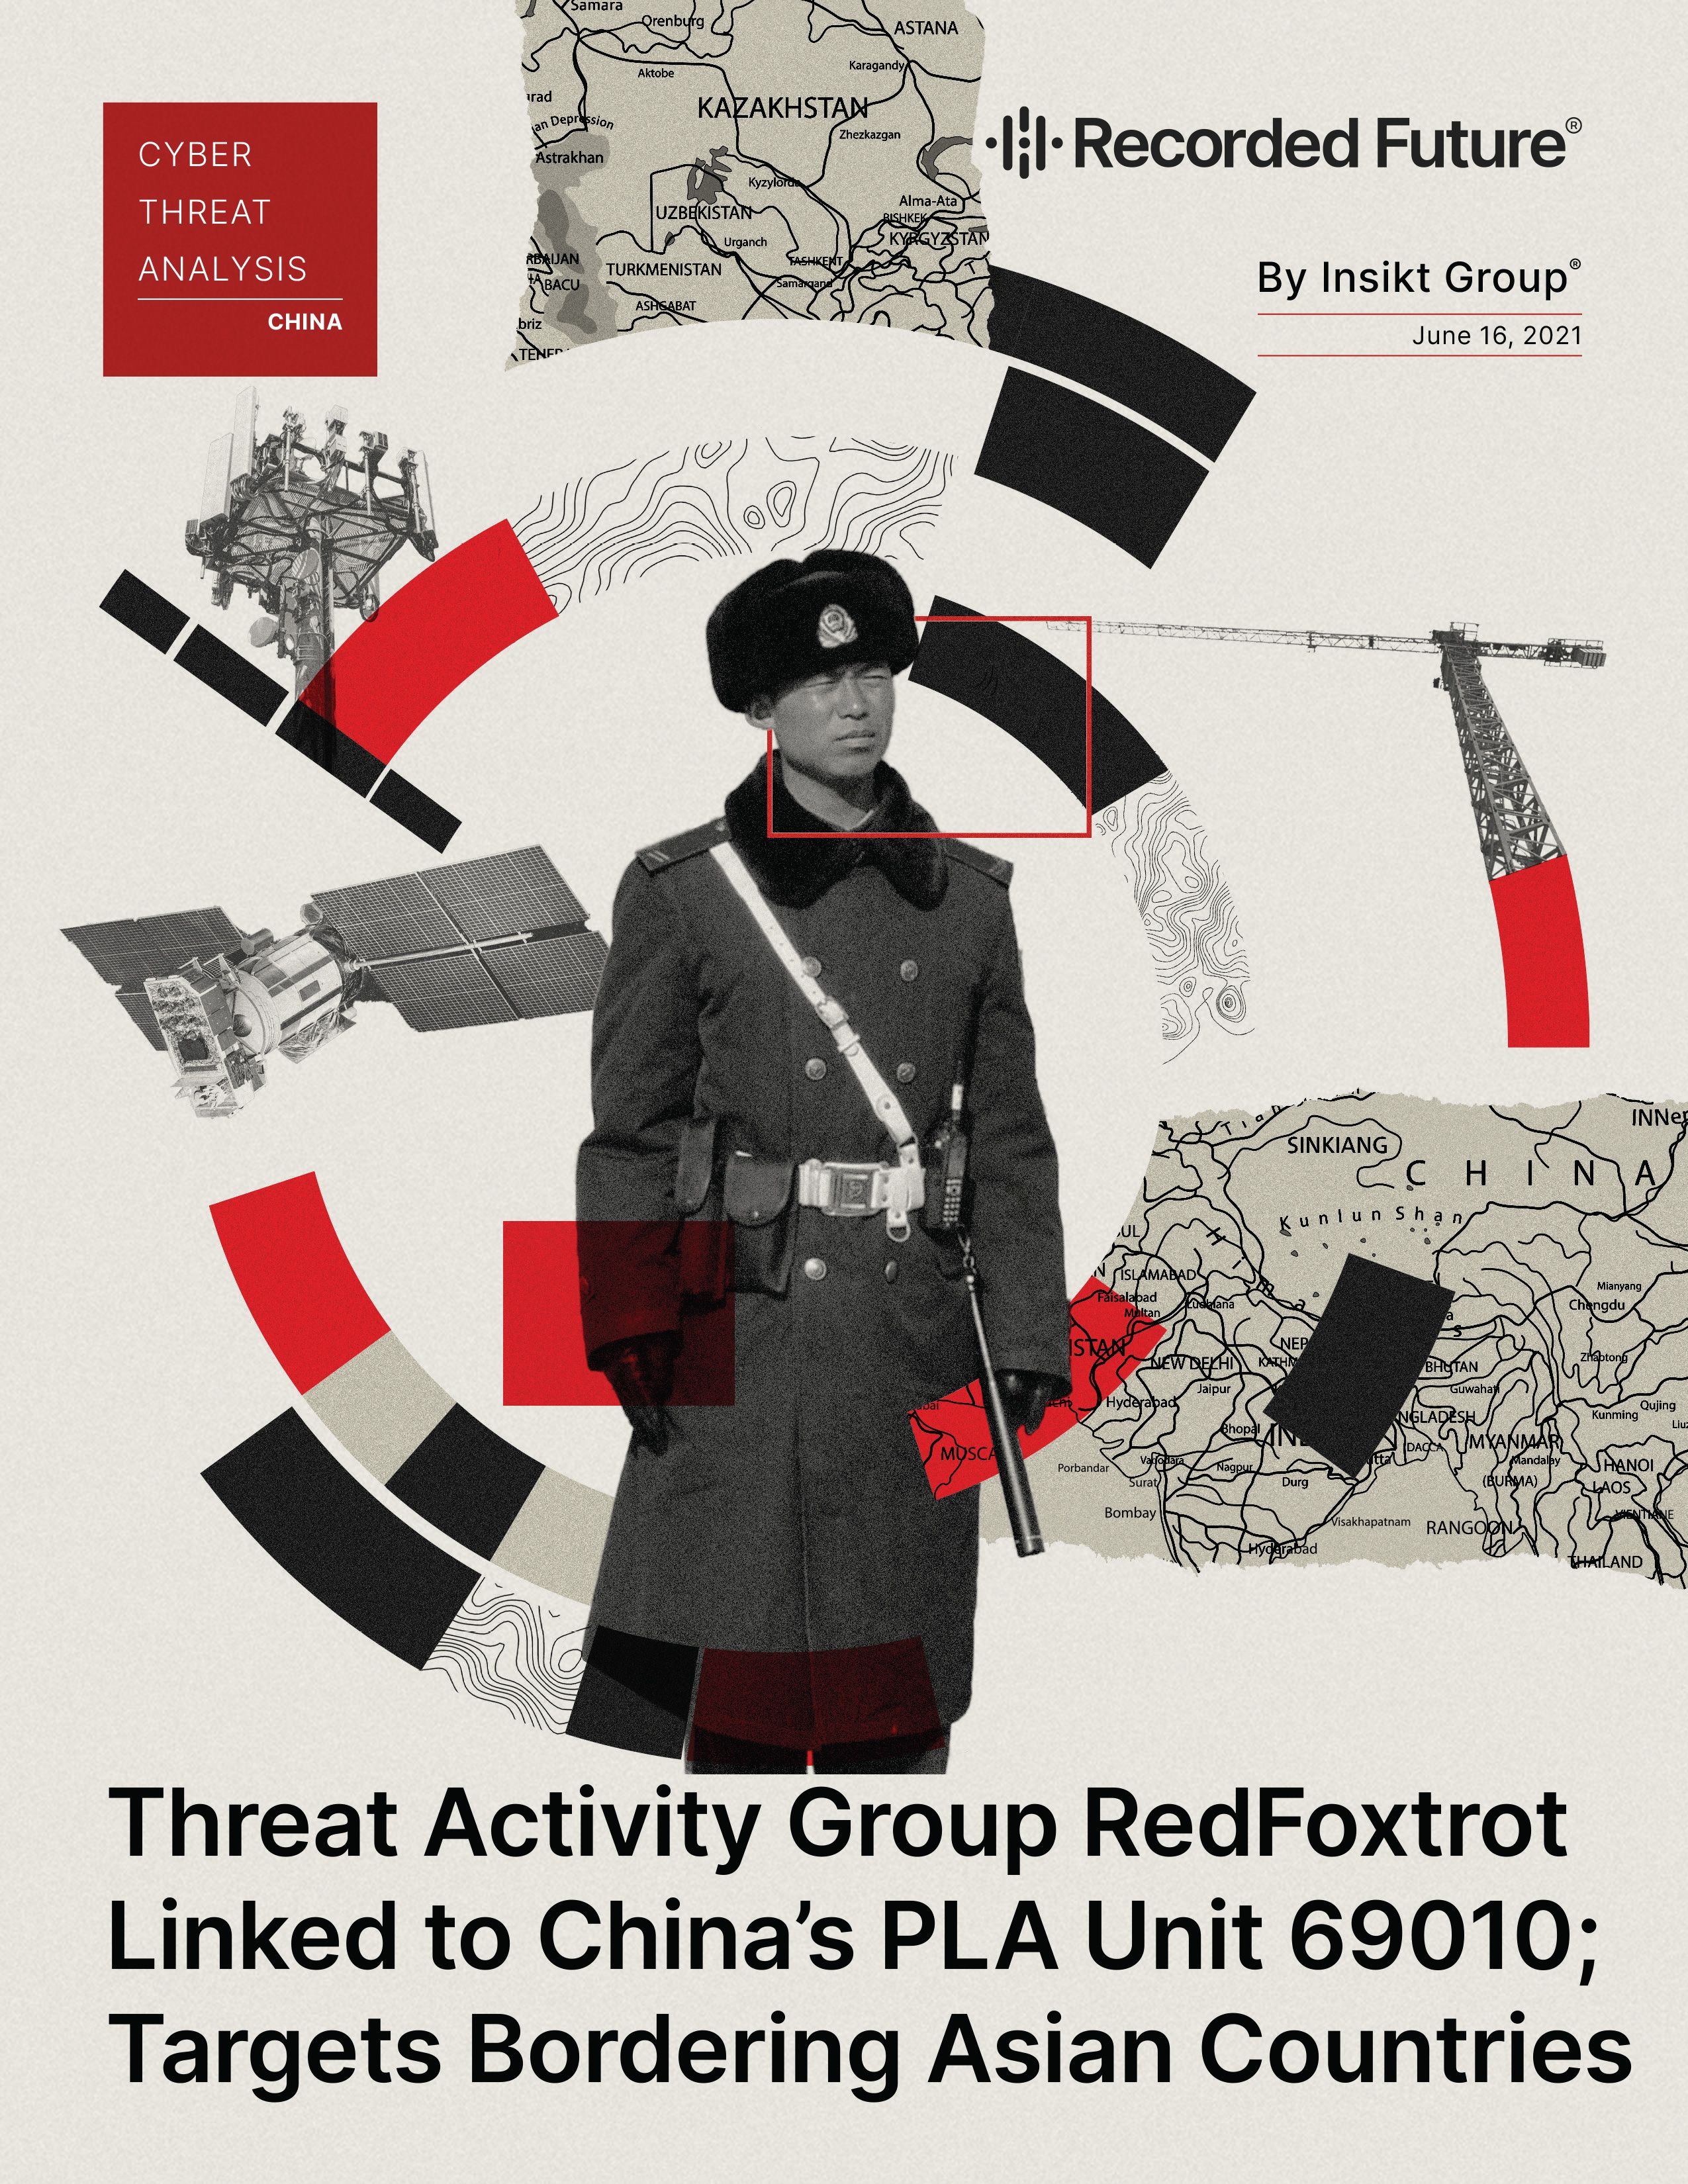 Threat Activity Group RedFoxtrot Linked to China’s PLA Unit 69010